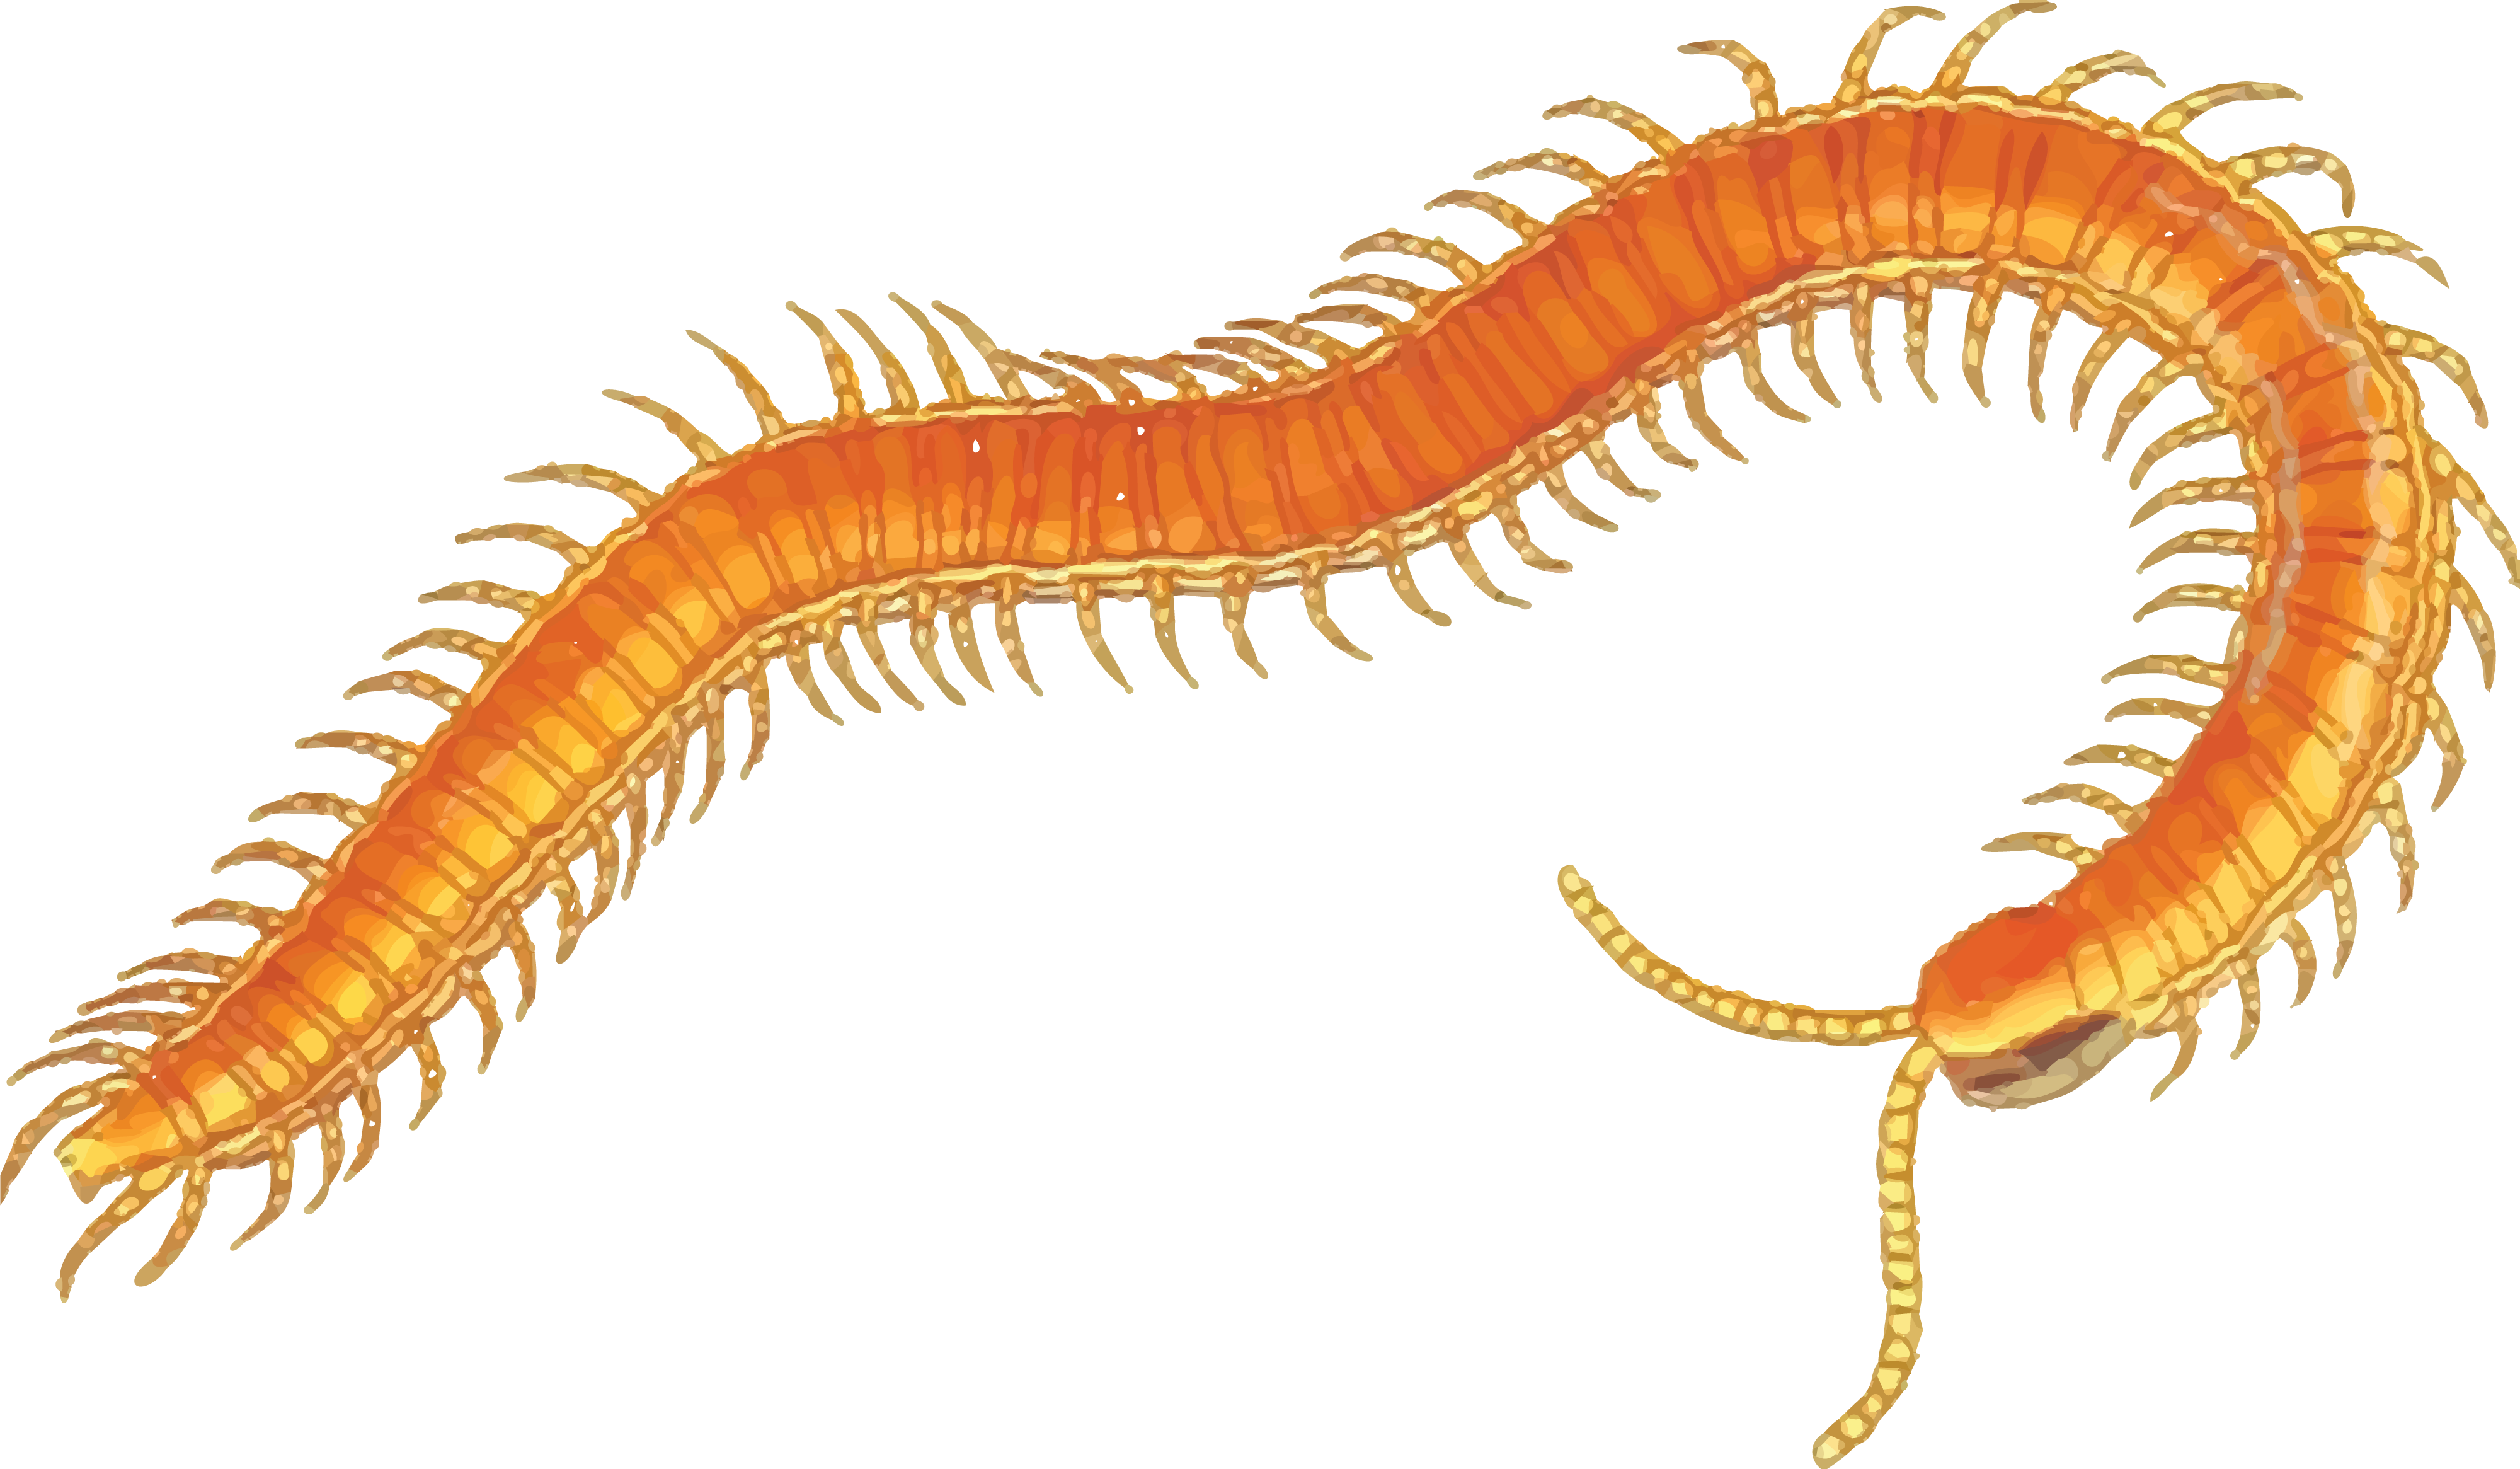 insects clipart centipede